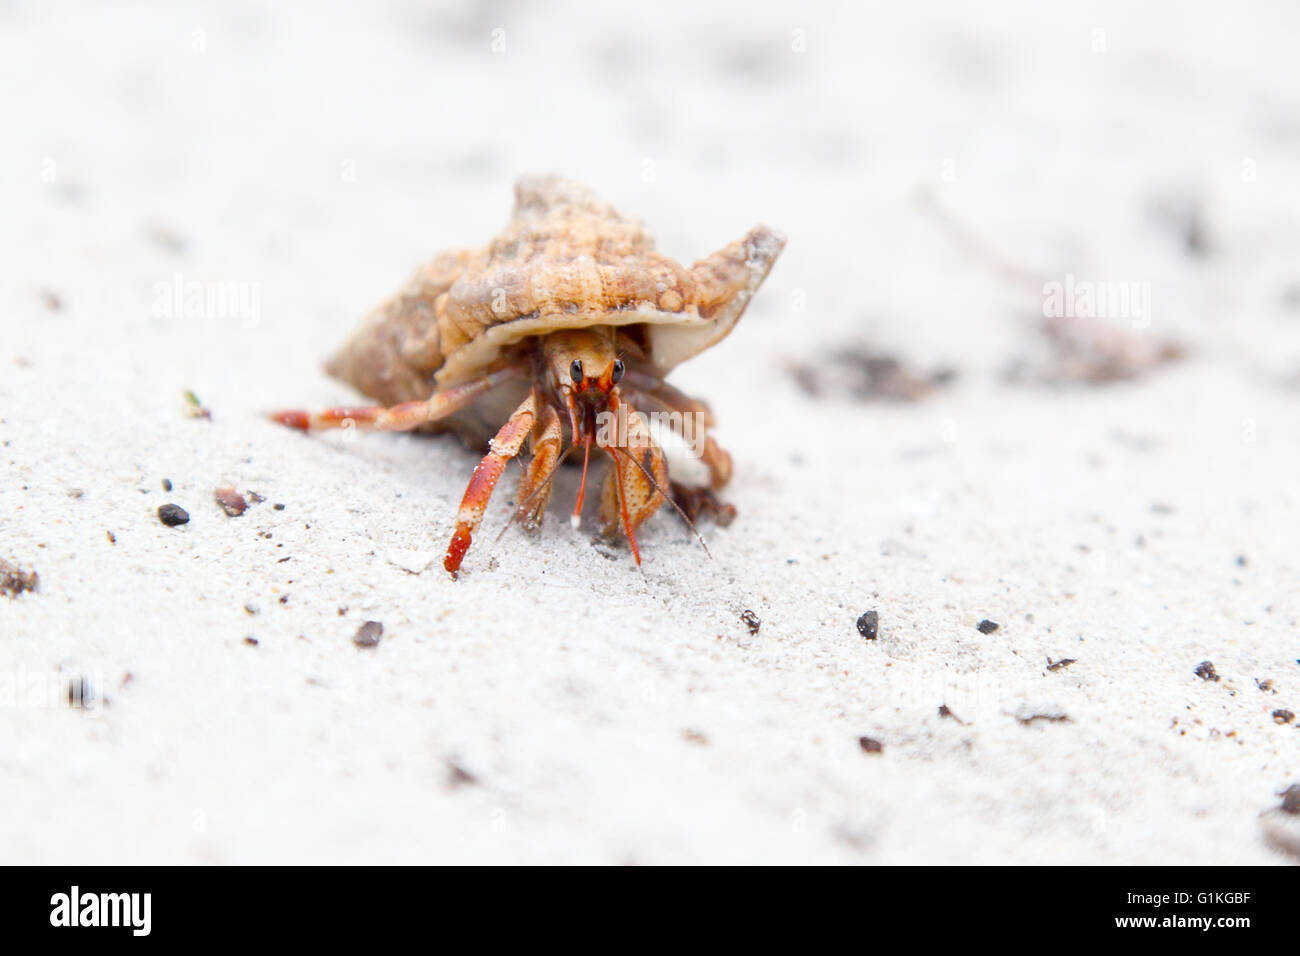 A small orange hermit crab on a tropical beach with white sand Stock Photo